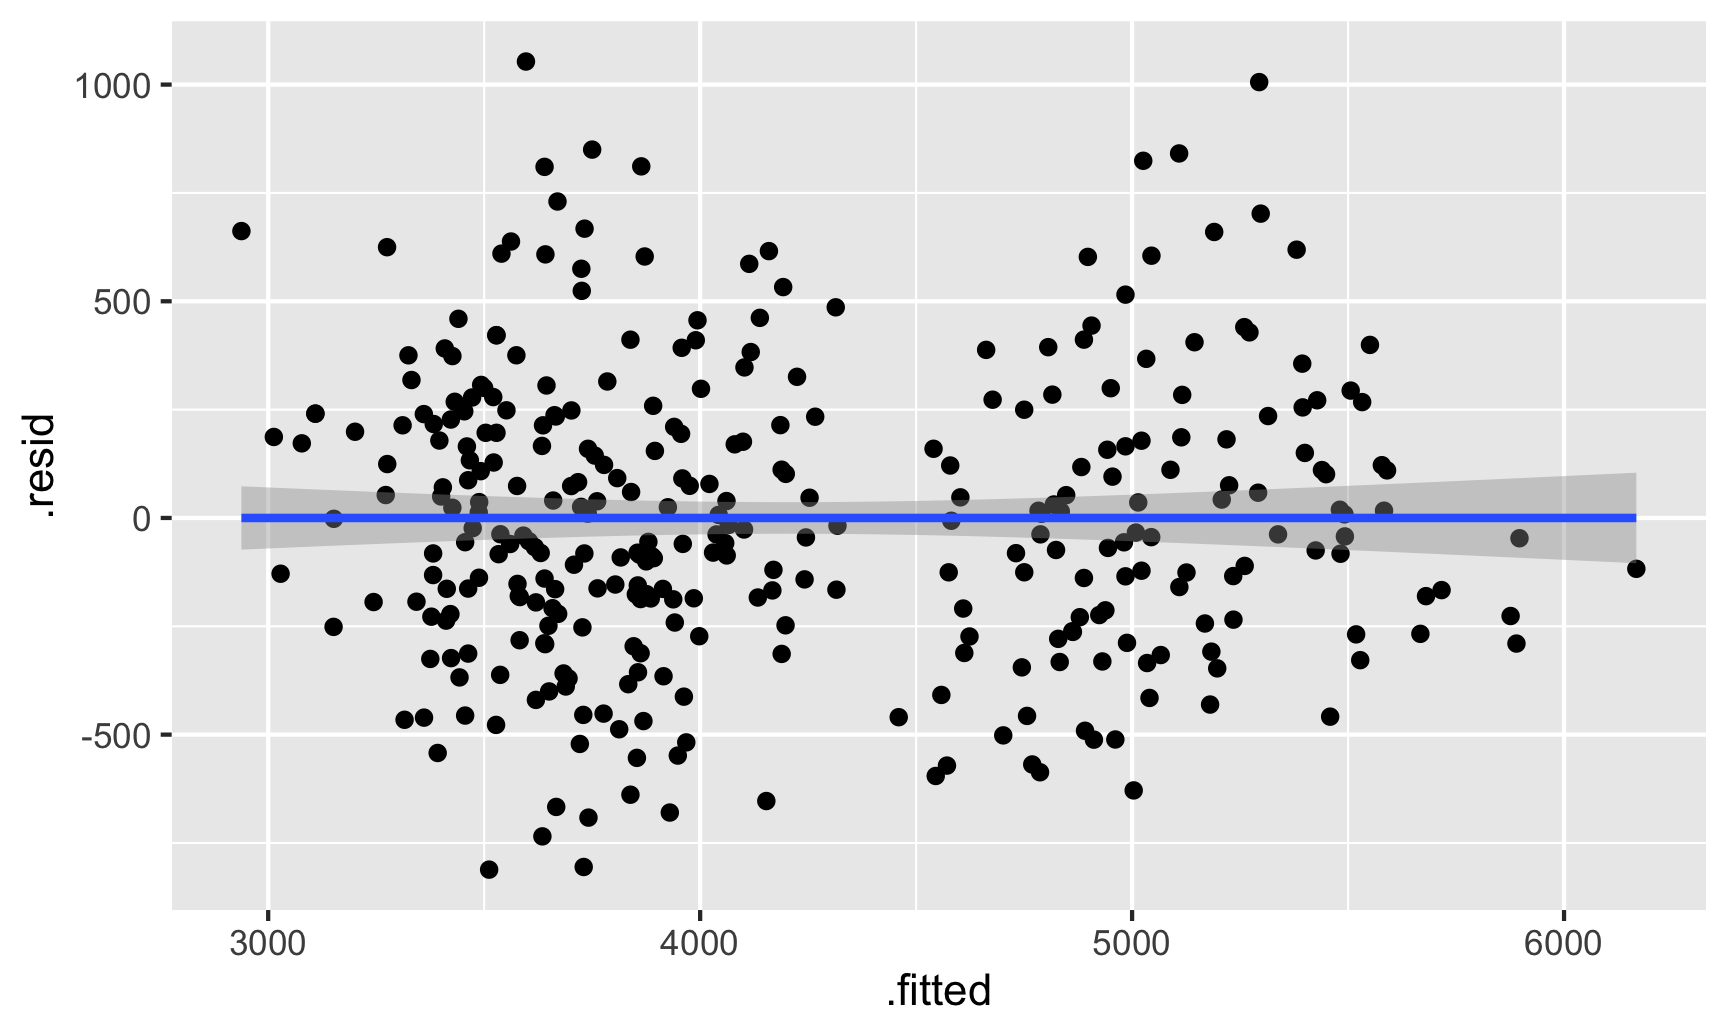 Regression results of the fixed effect model with cluster standard